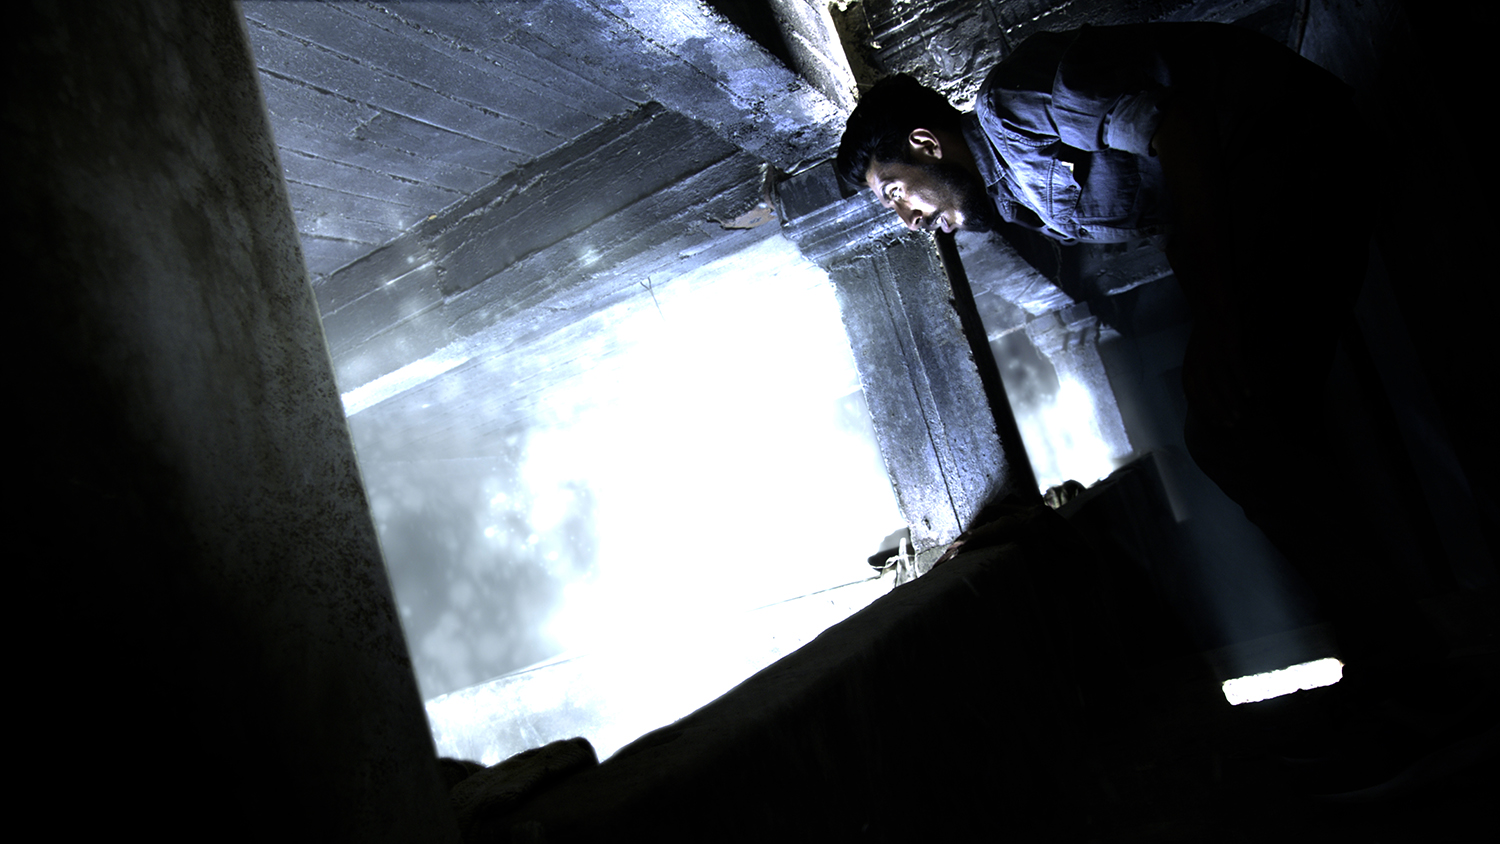 A man stares into a glowing abyss in What is Buried Must Remain, with VFX completed by Foxtrot X-Ray